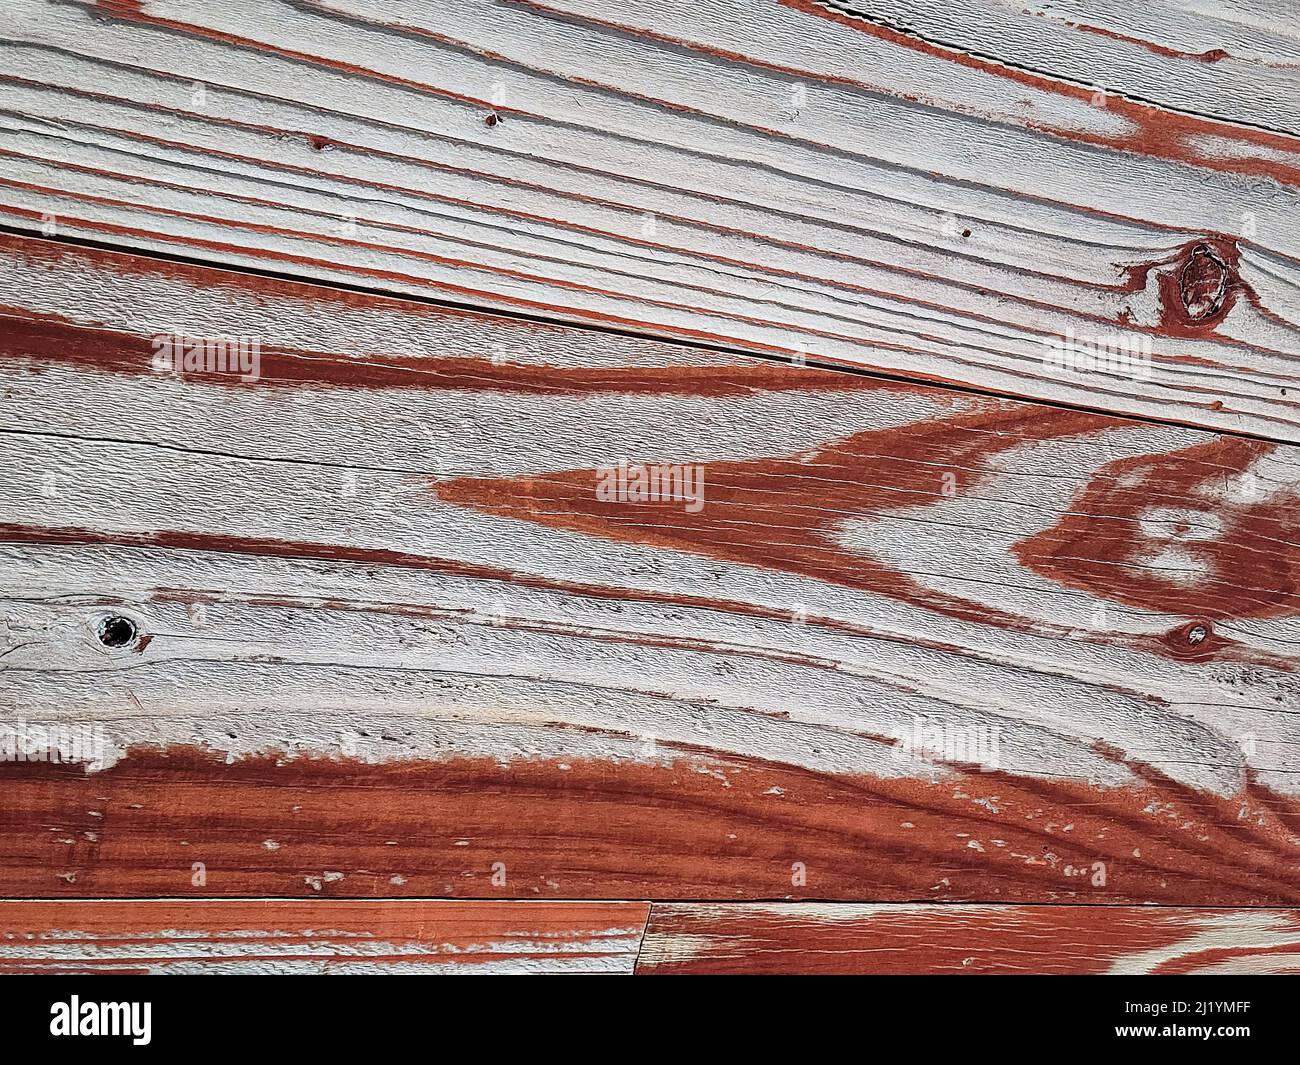 Close up of reddish-brown faded paint on weathered wood Stock Photo